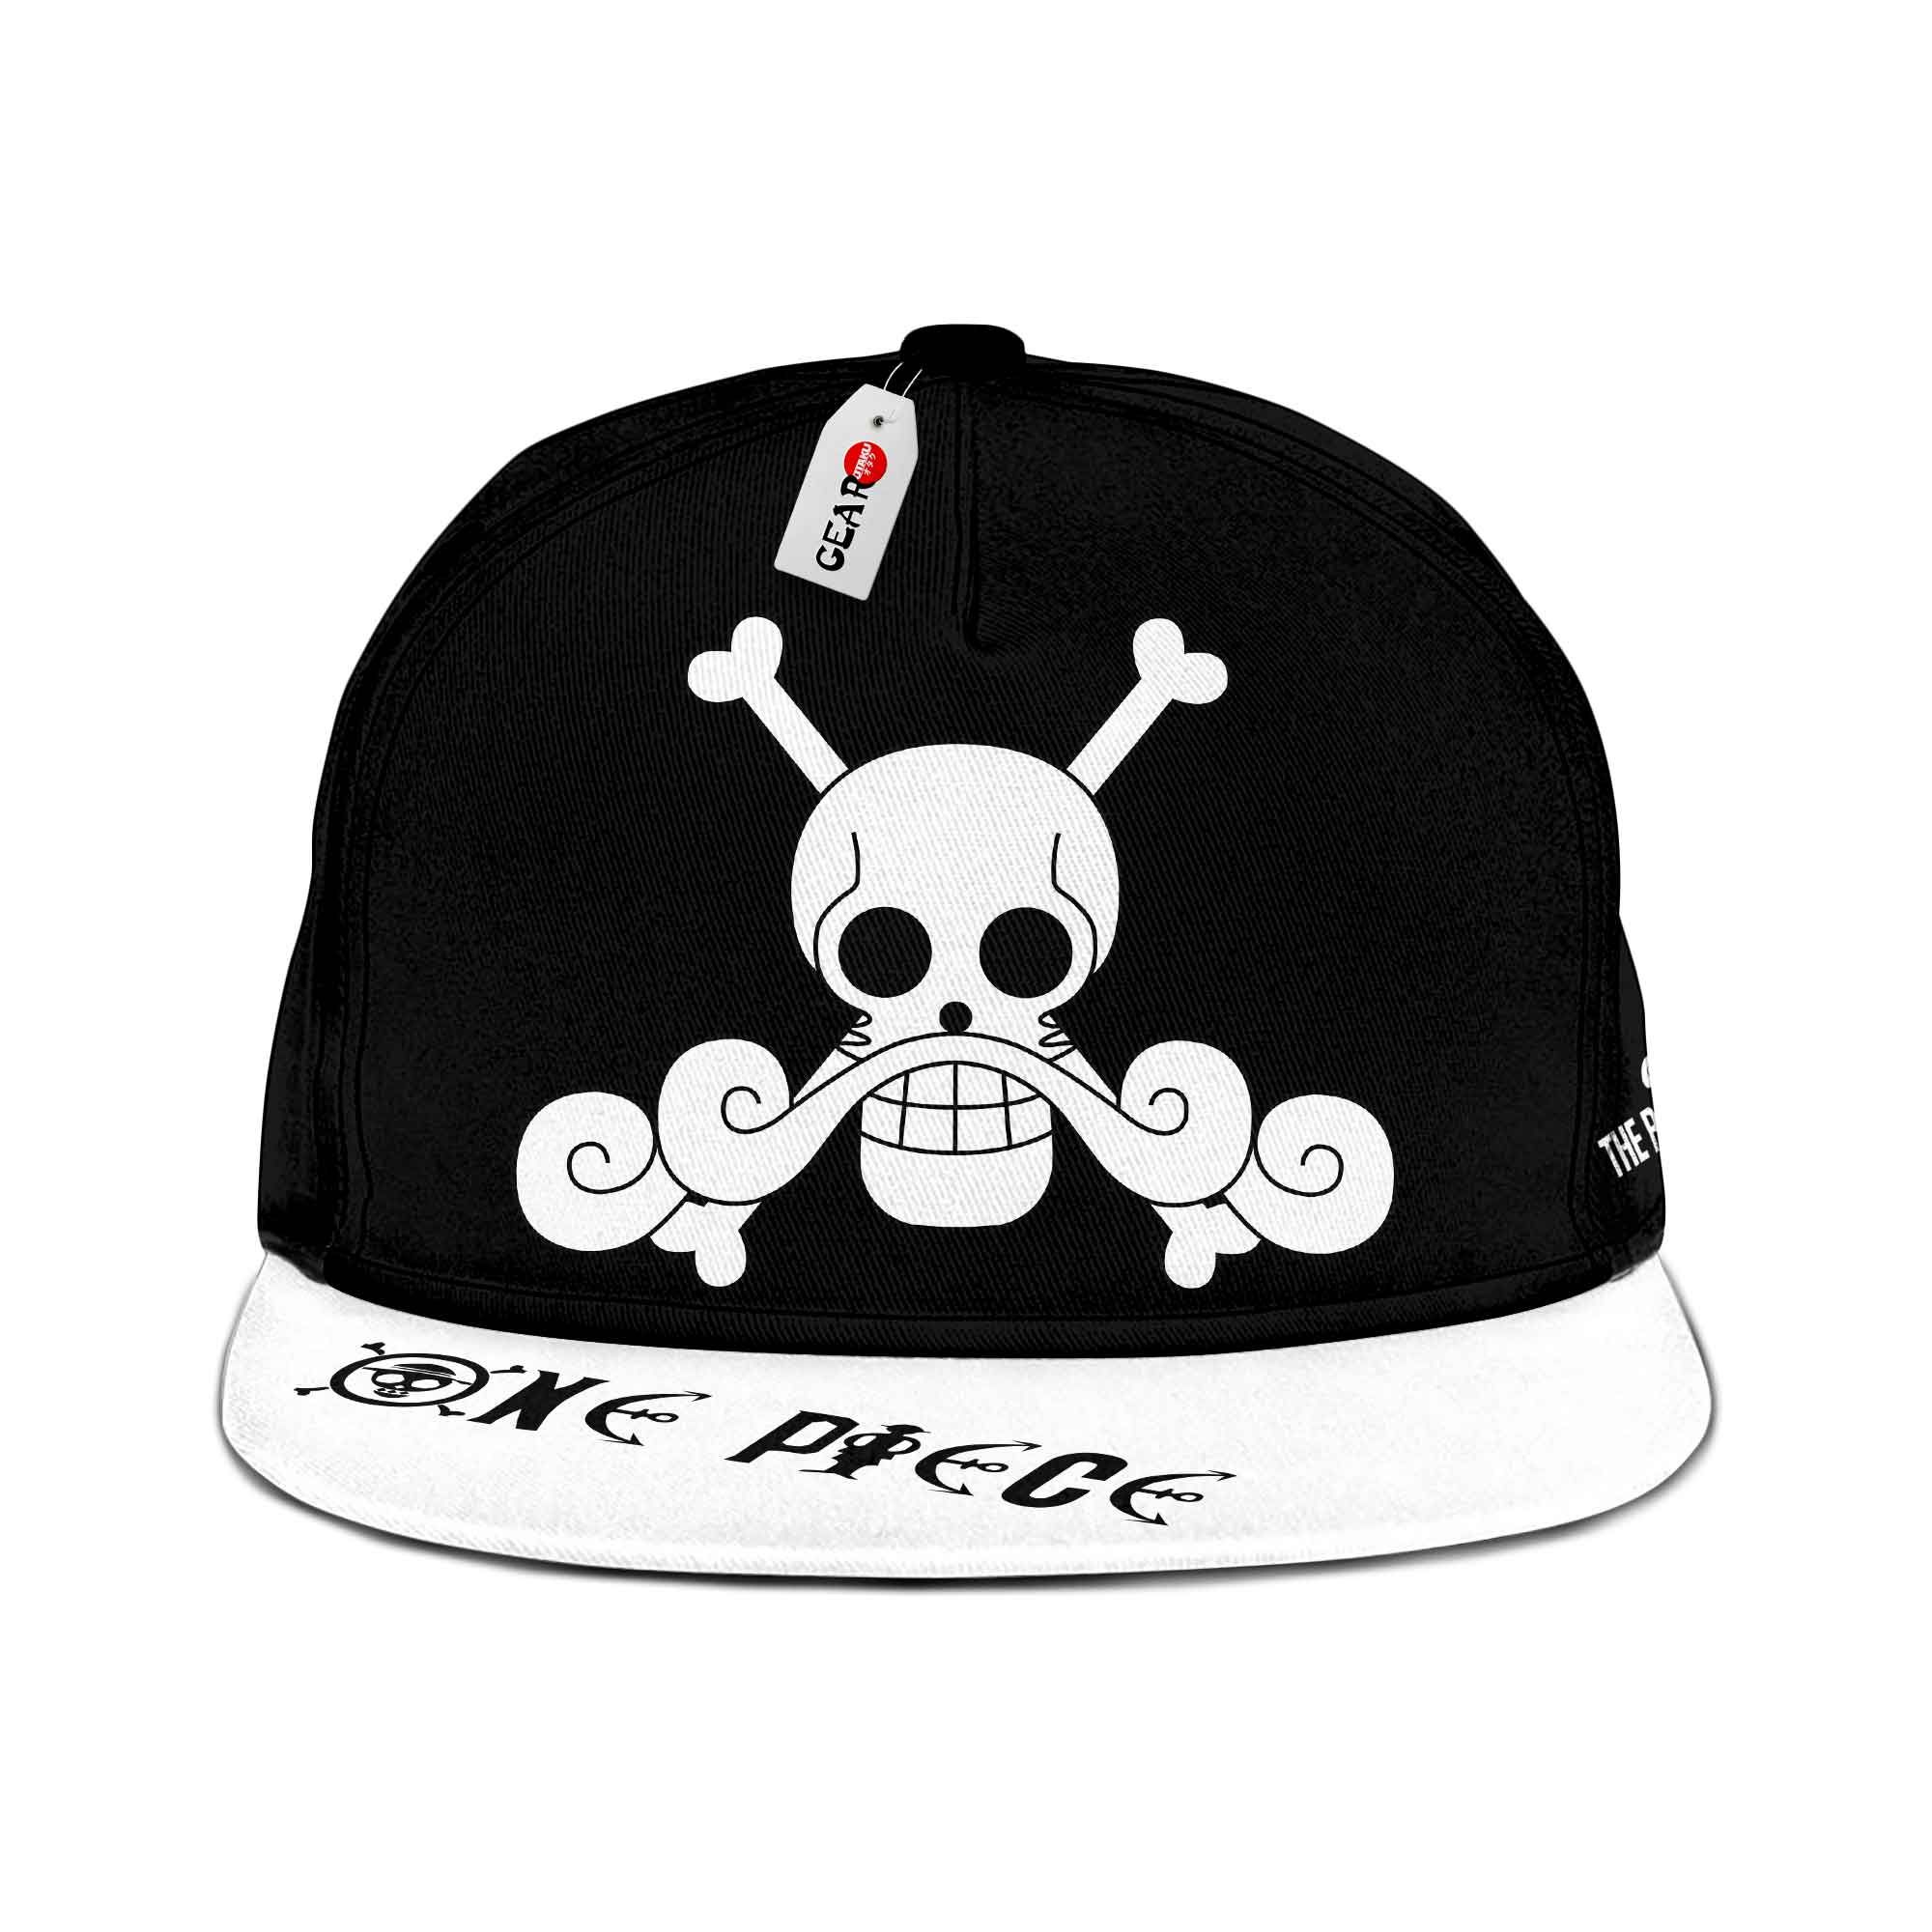 NEW Roger Pirates One Piece Cap hat1